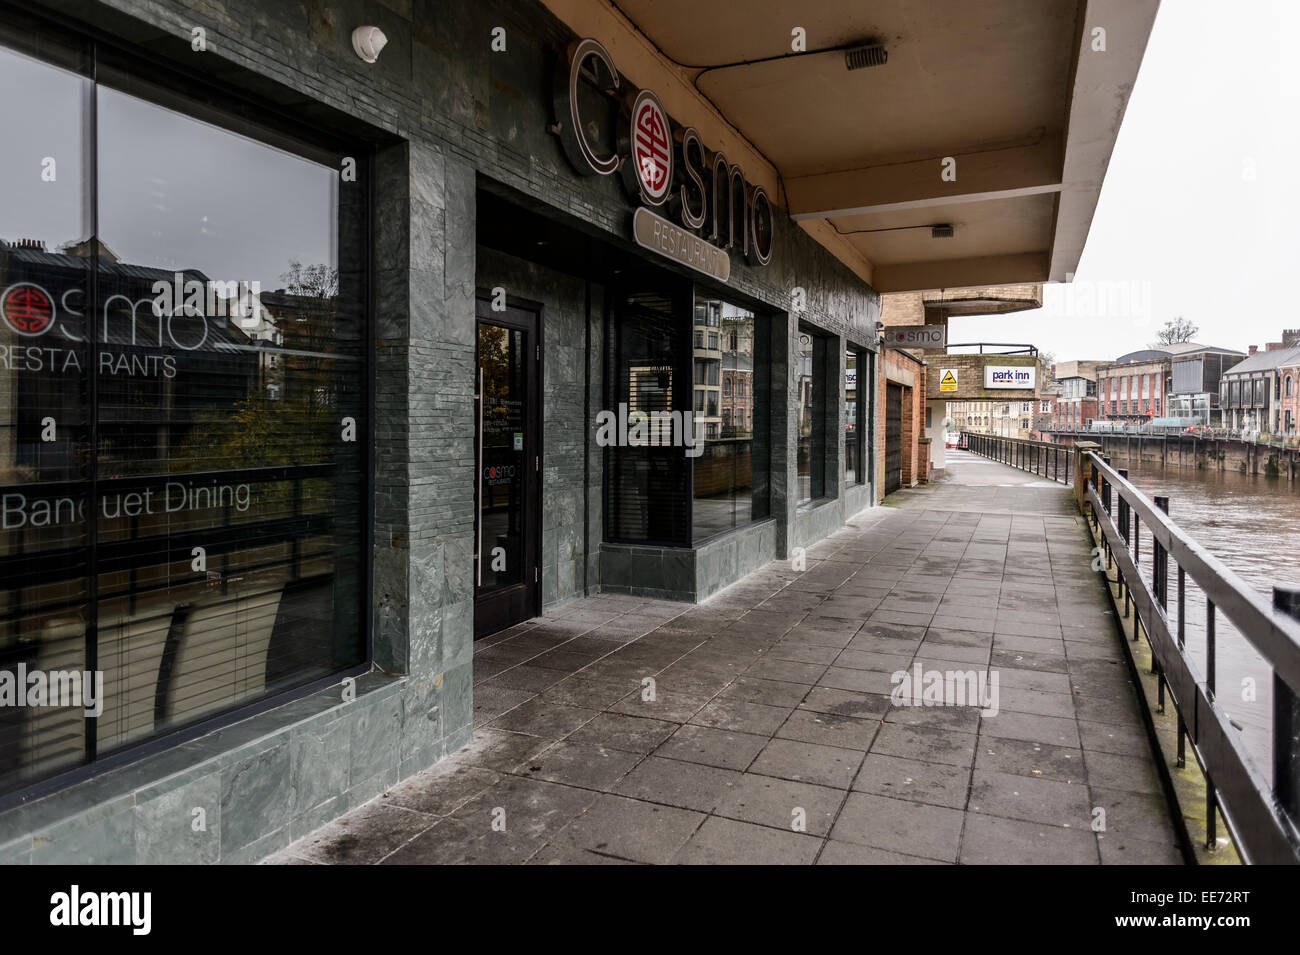 The front of Cosmo, a restaurant that serves World Cuisine, sited on the River Ouse in York. Stock Photo